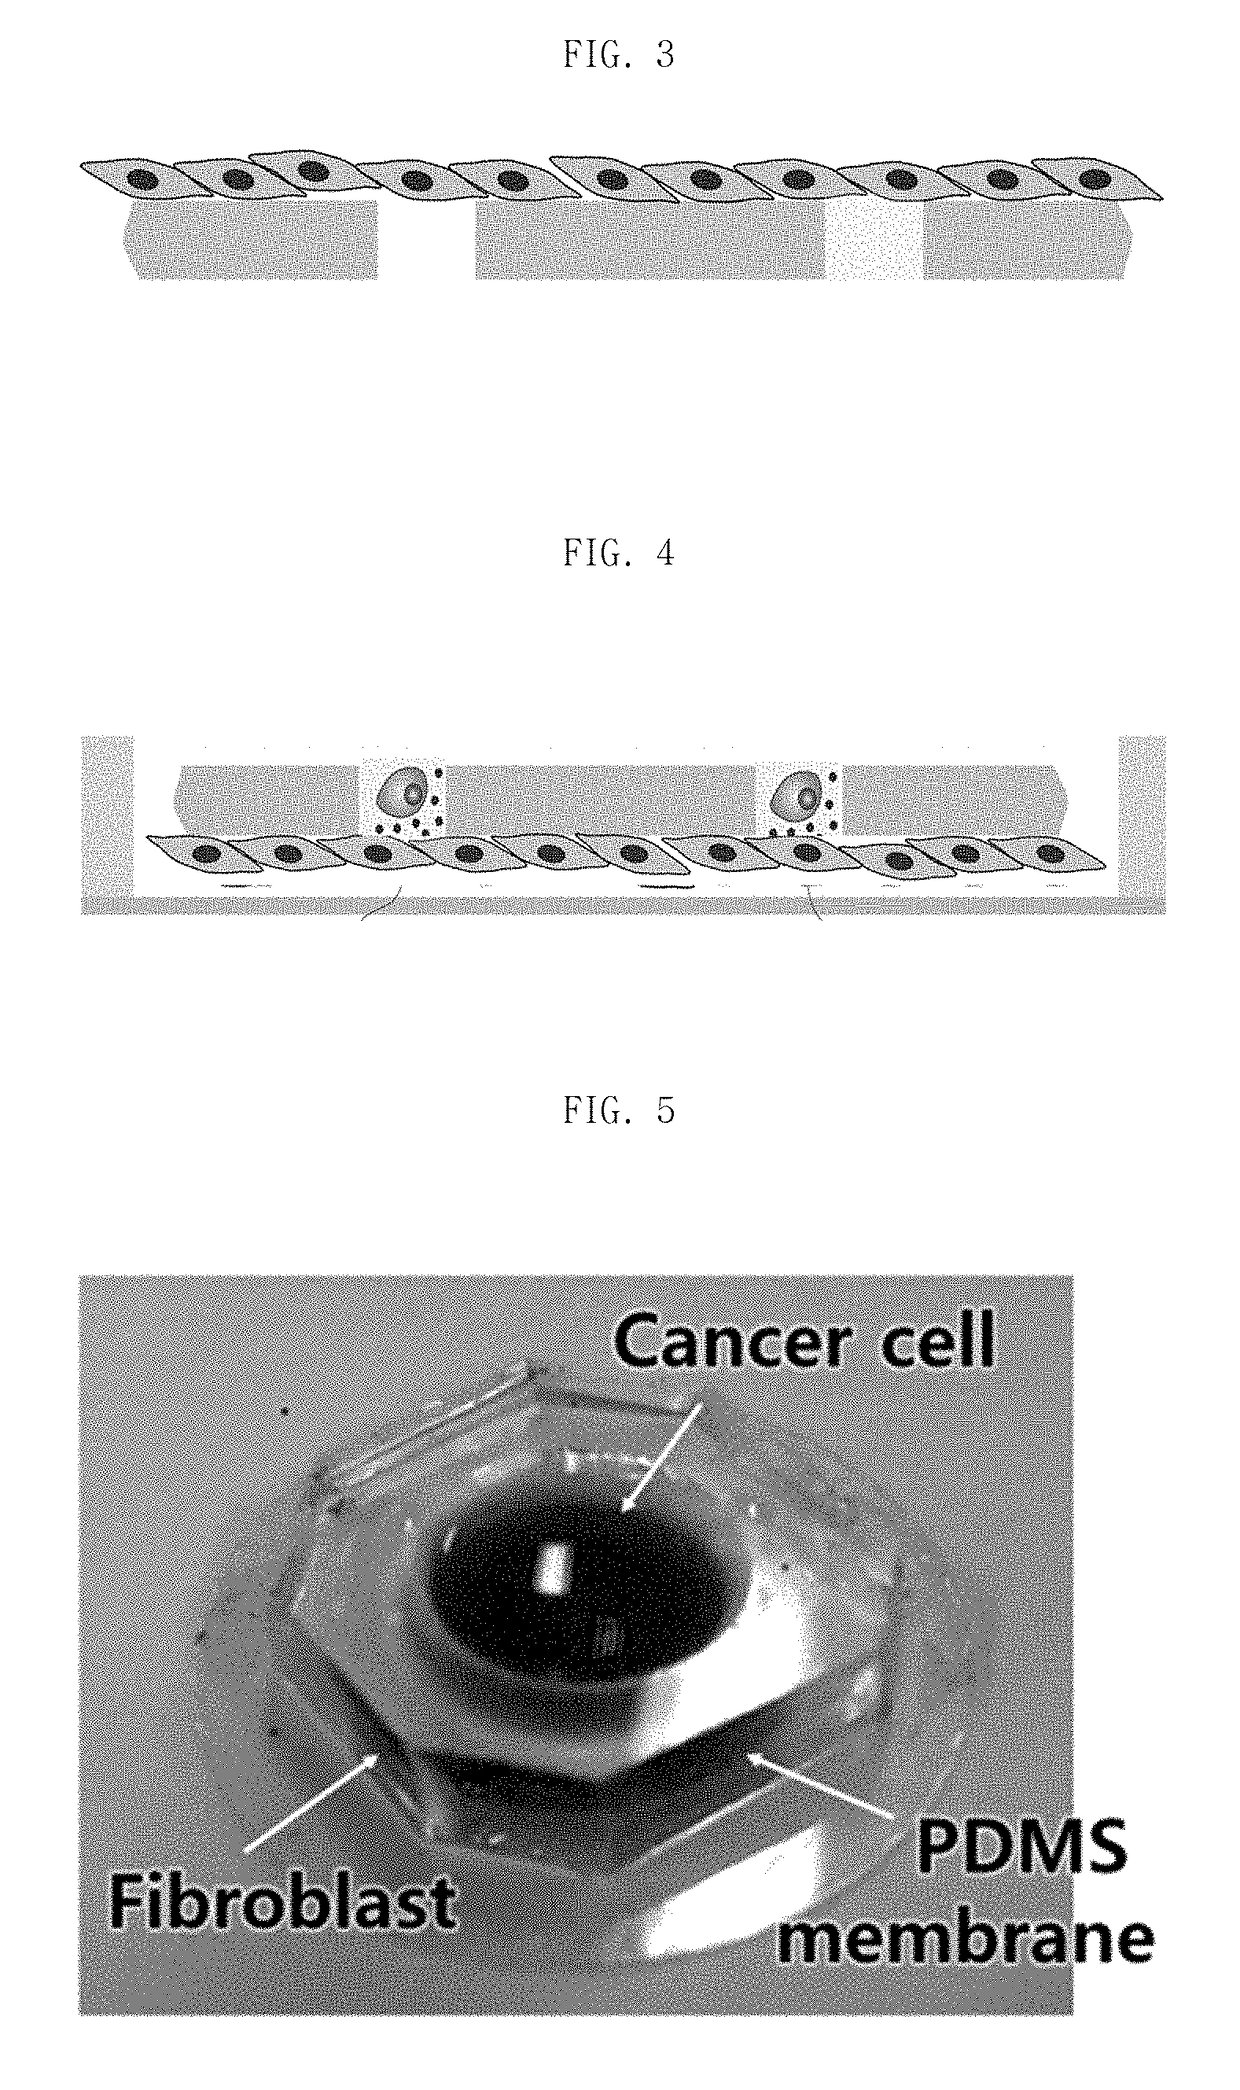 Device and method for single cell screening based on inter-cellular communication